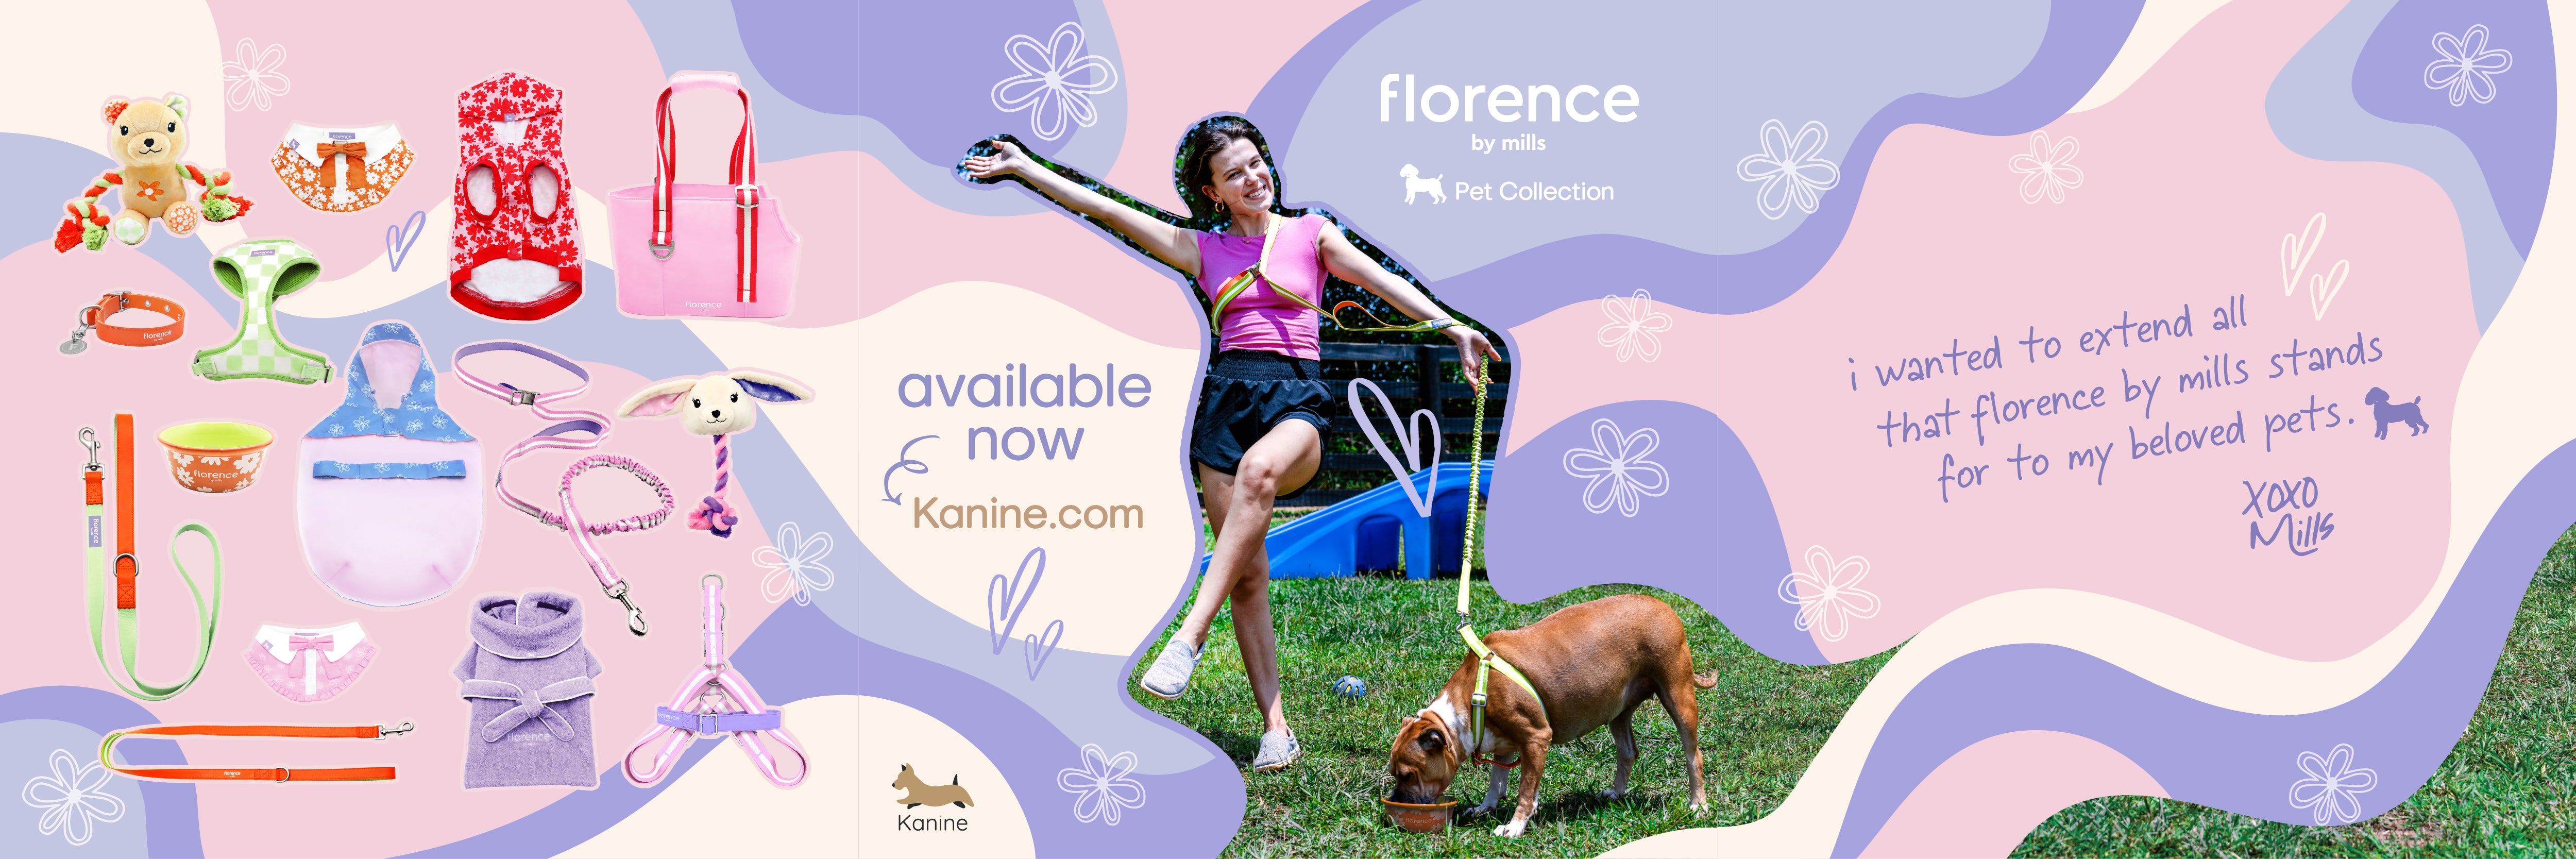 Kanine To Launch Premium Dog Line From Millie Bobby Brown's